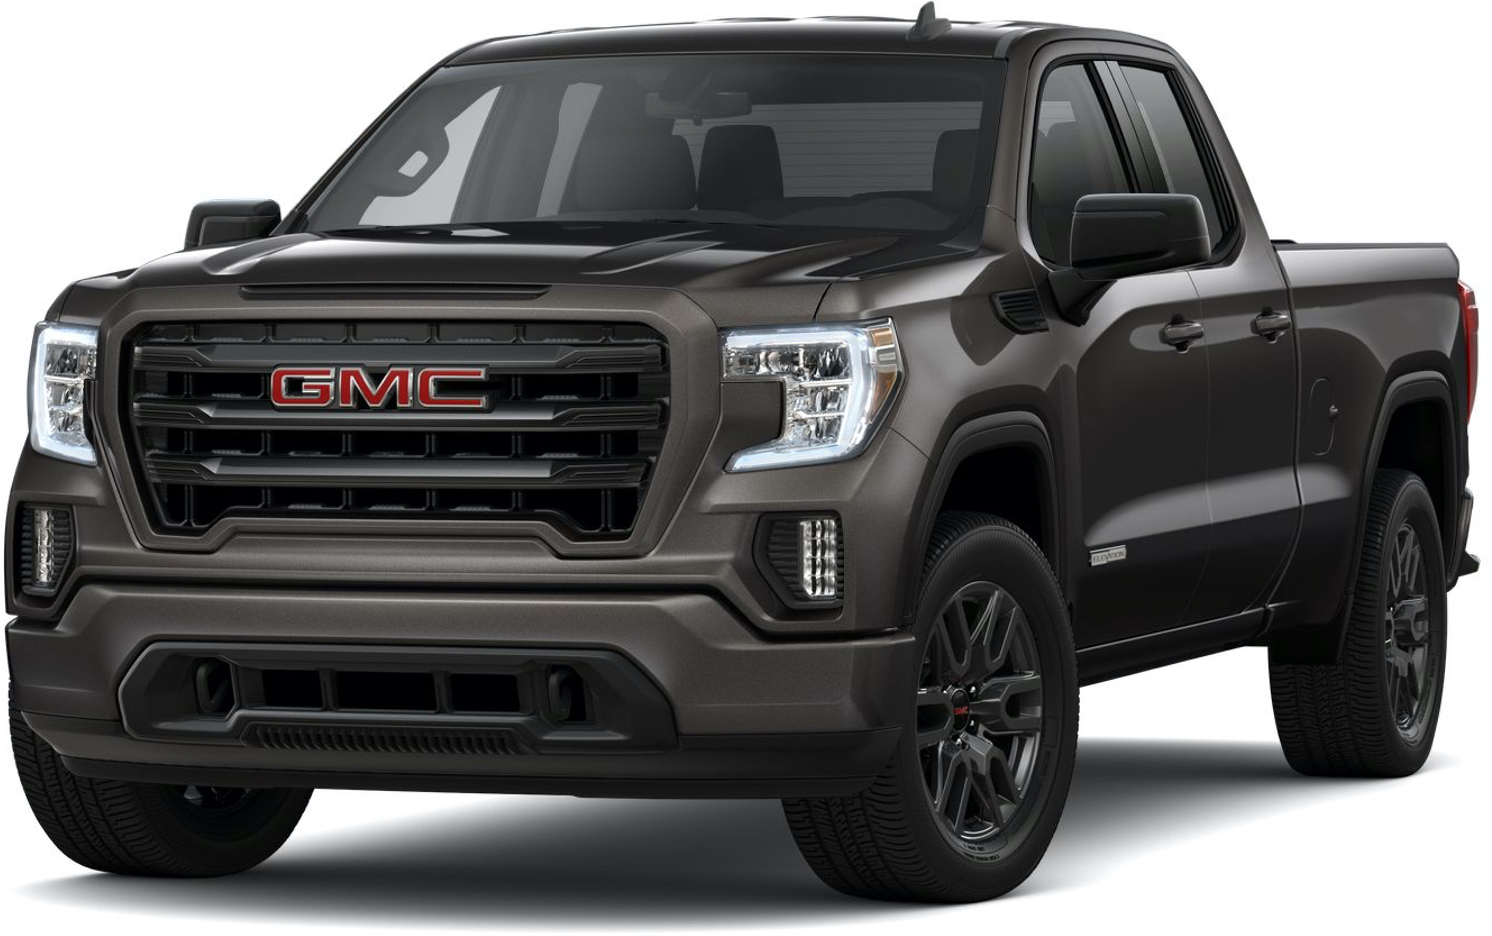 2022 GMC Sierra HD Will Lose These Two Paint Colors